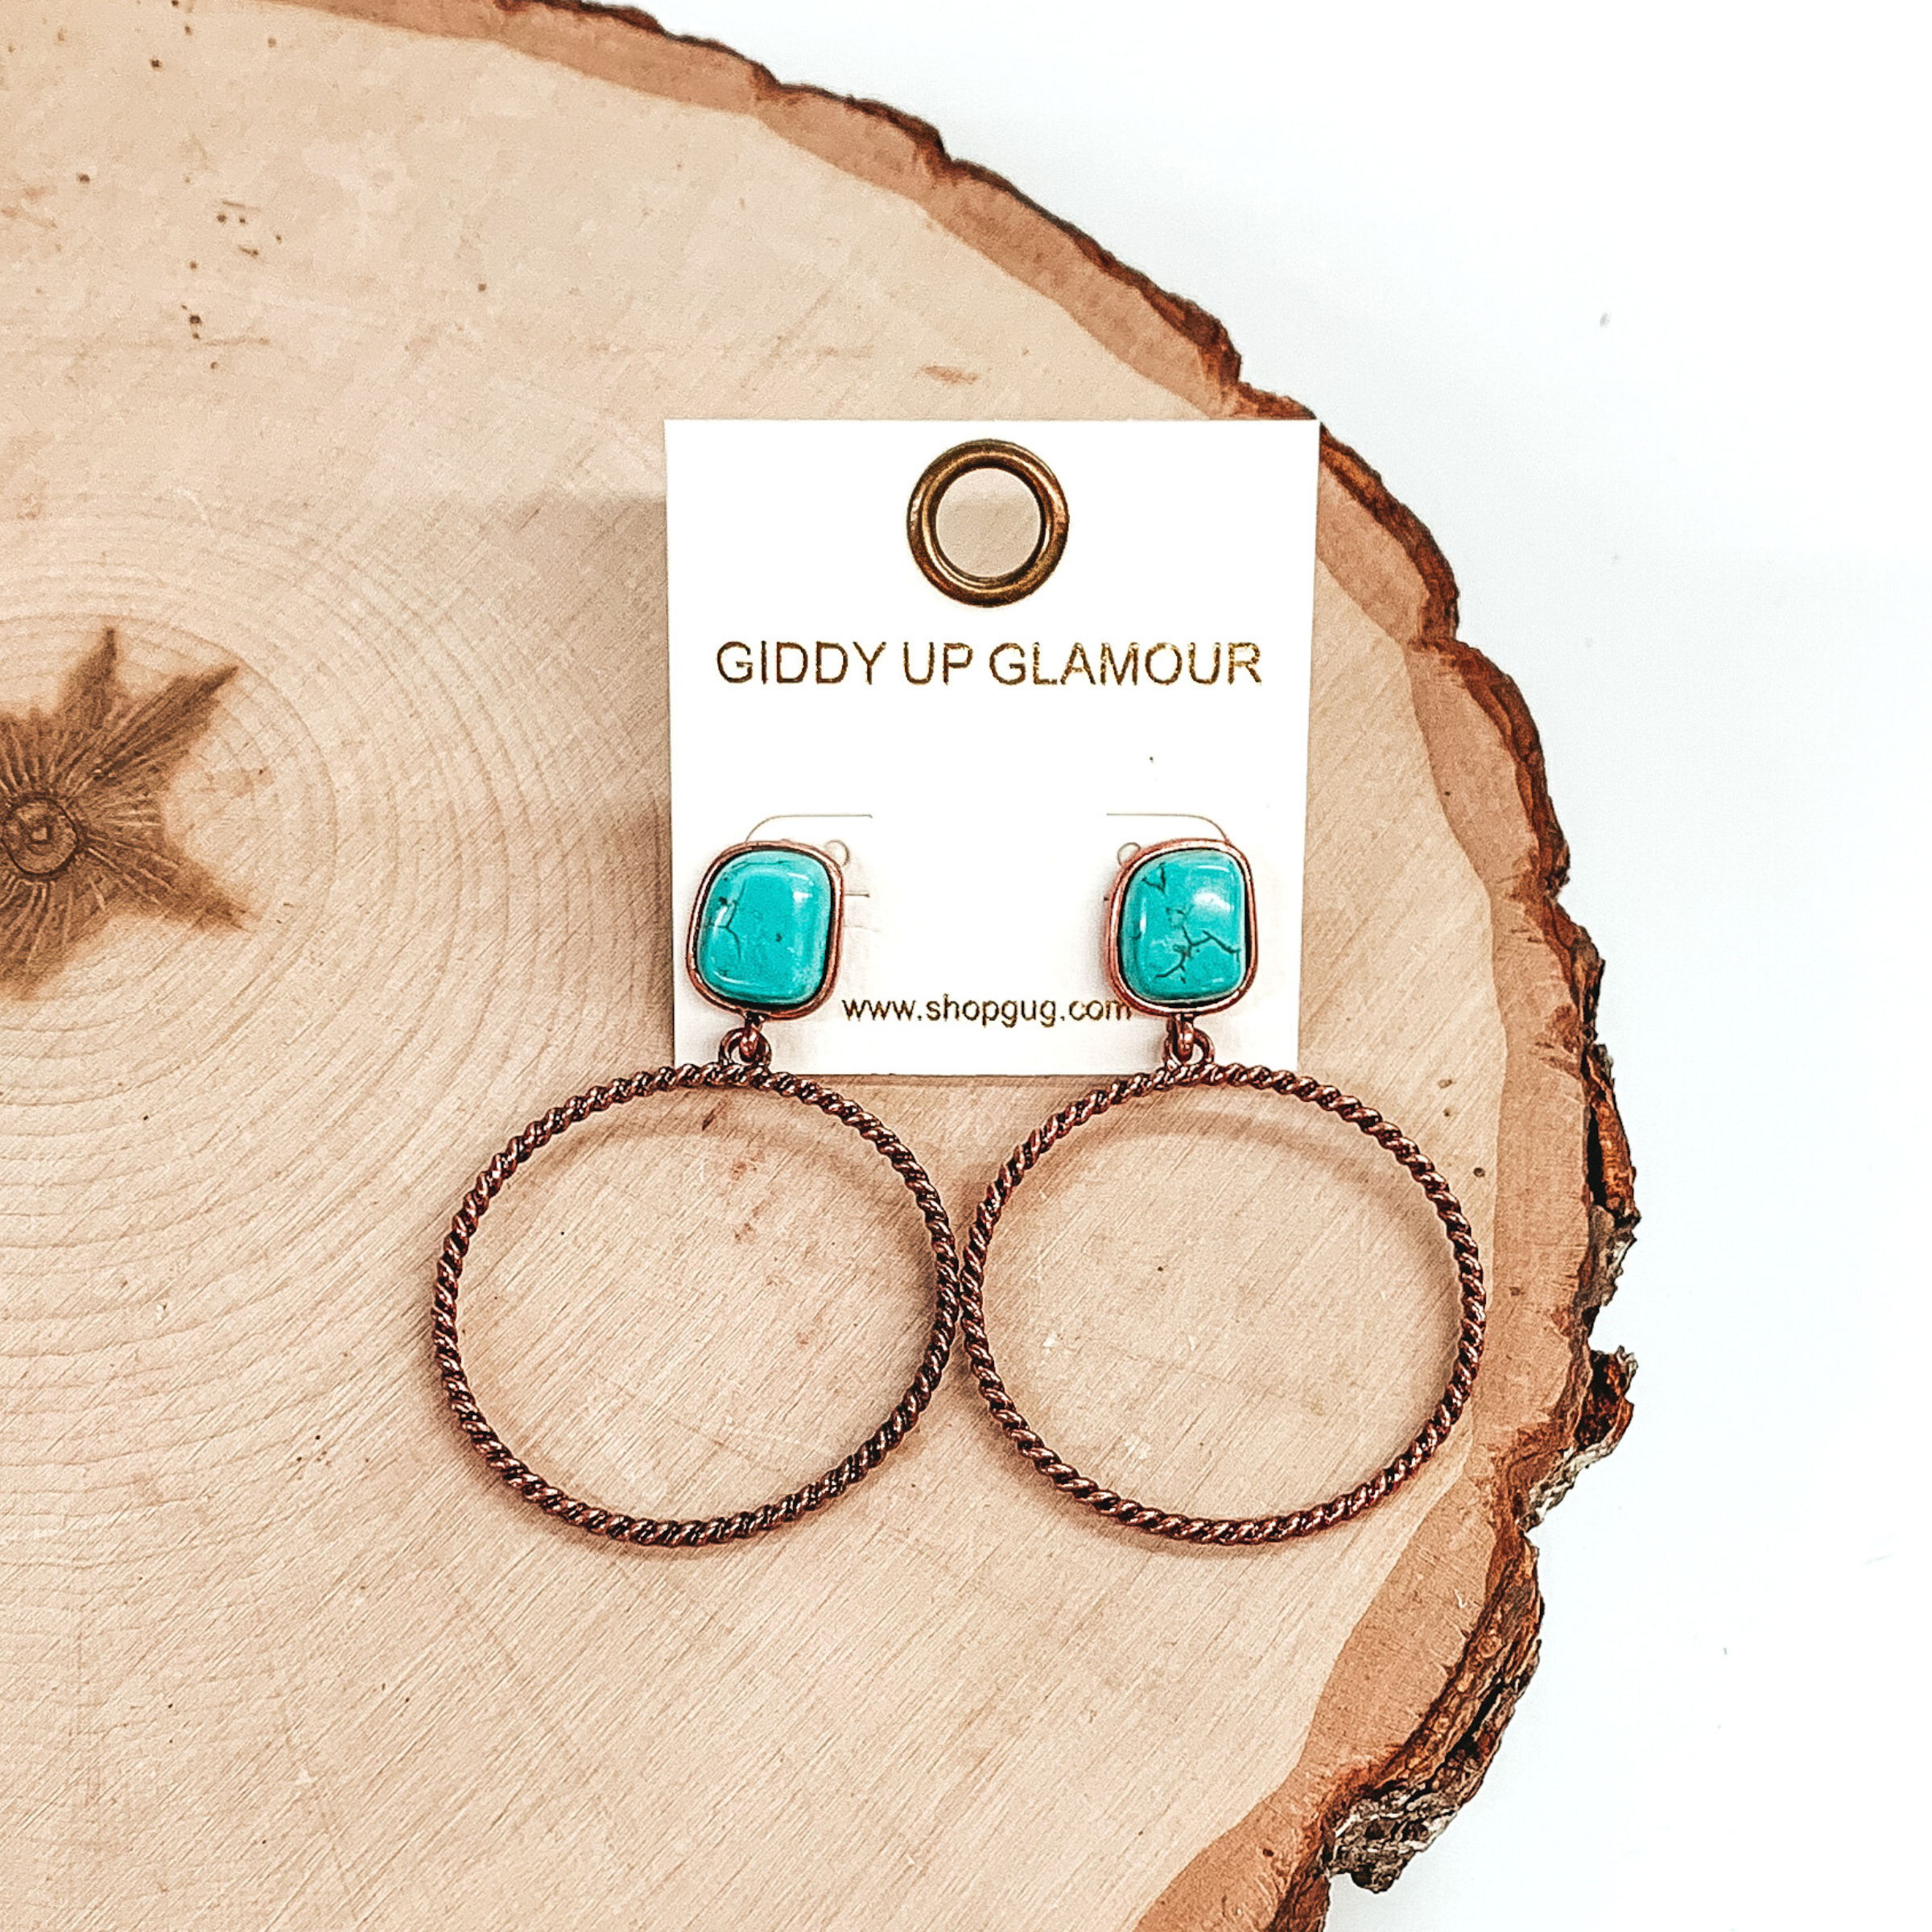 Rounded, square stone stud earrings in turquoise with a copper, twisted open circle pendant hanging from the bottom. These earrings are pictured on a piece of wood on a white background. 